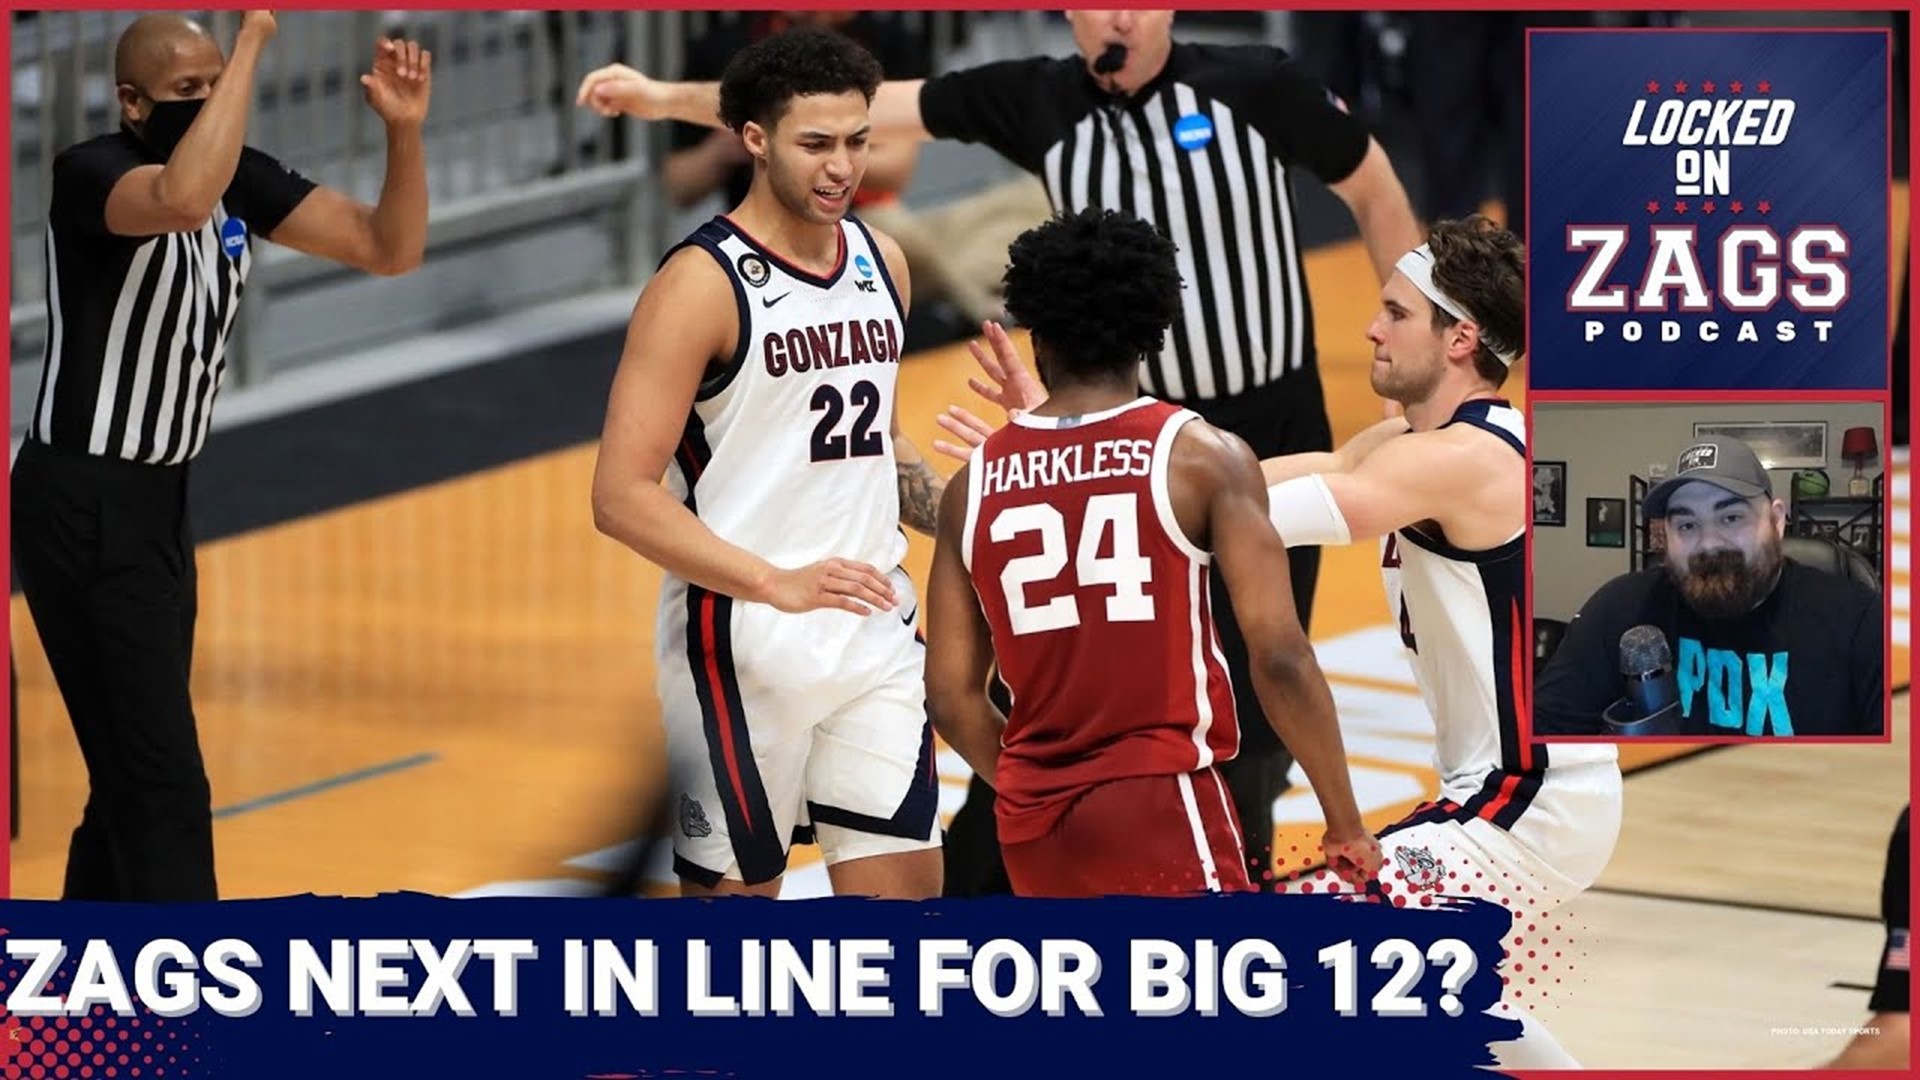 The Gonzaga Bulldogs remain in the thick of conference realignment discussions, although the Big-12 is currently focused on poaching the four corner schools.